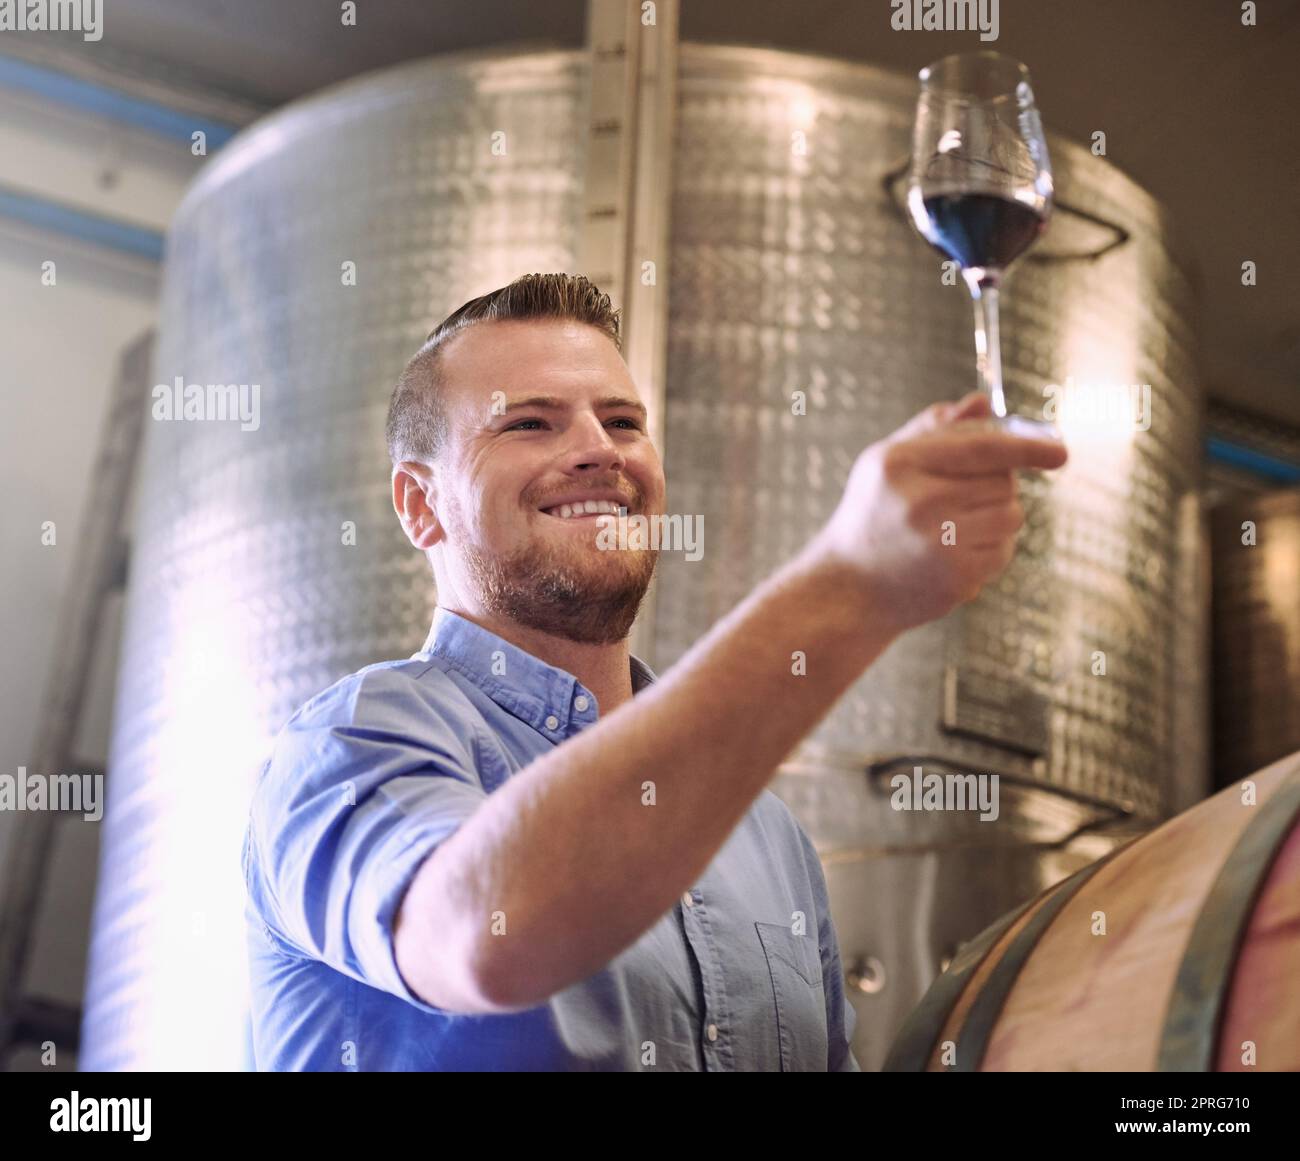 Making great wines using traditional, natural viticultural and winemaking methods. a man enjoying wine tasting in his distillery. Stock Photo